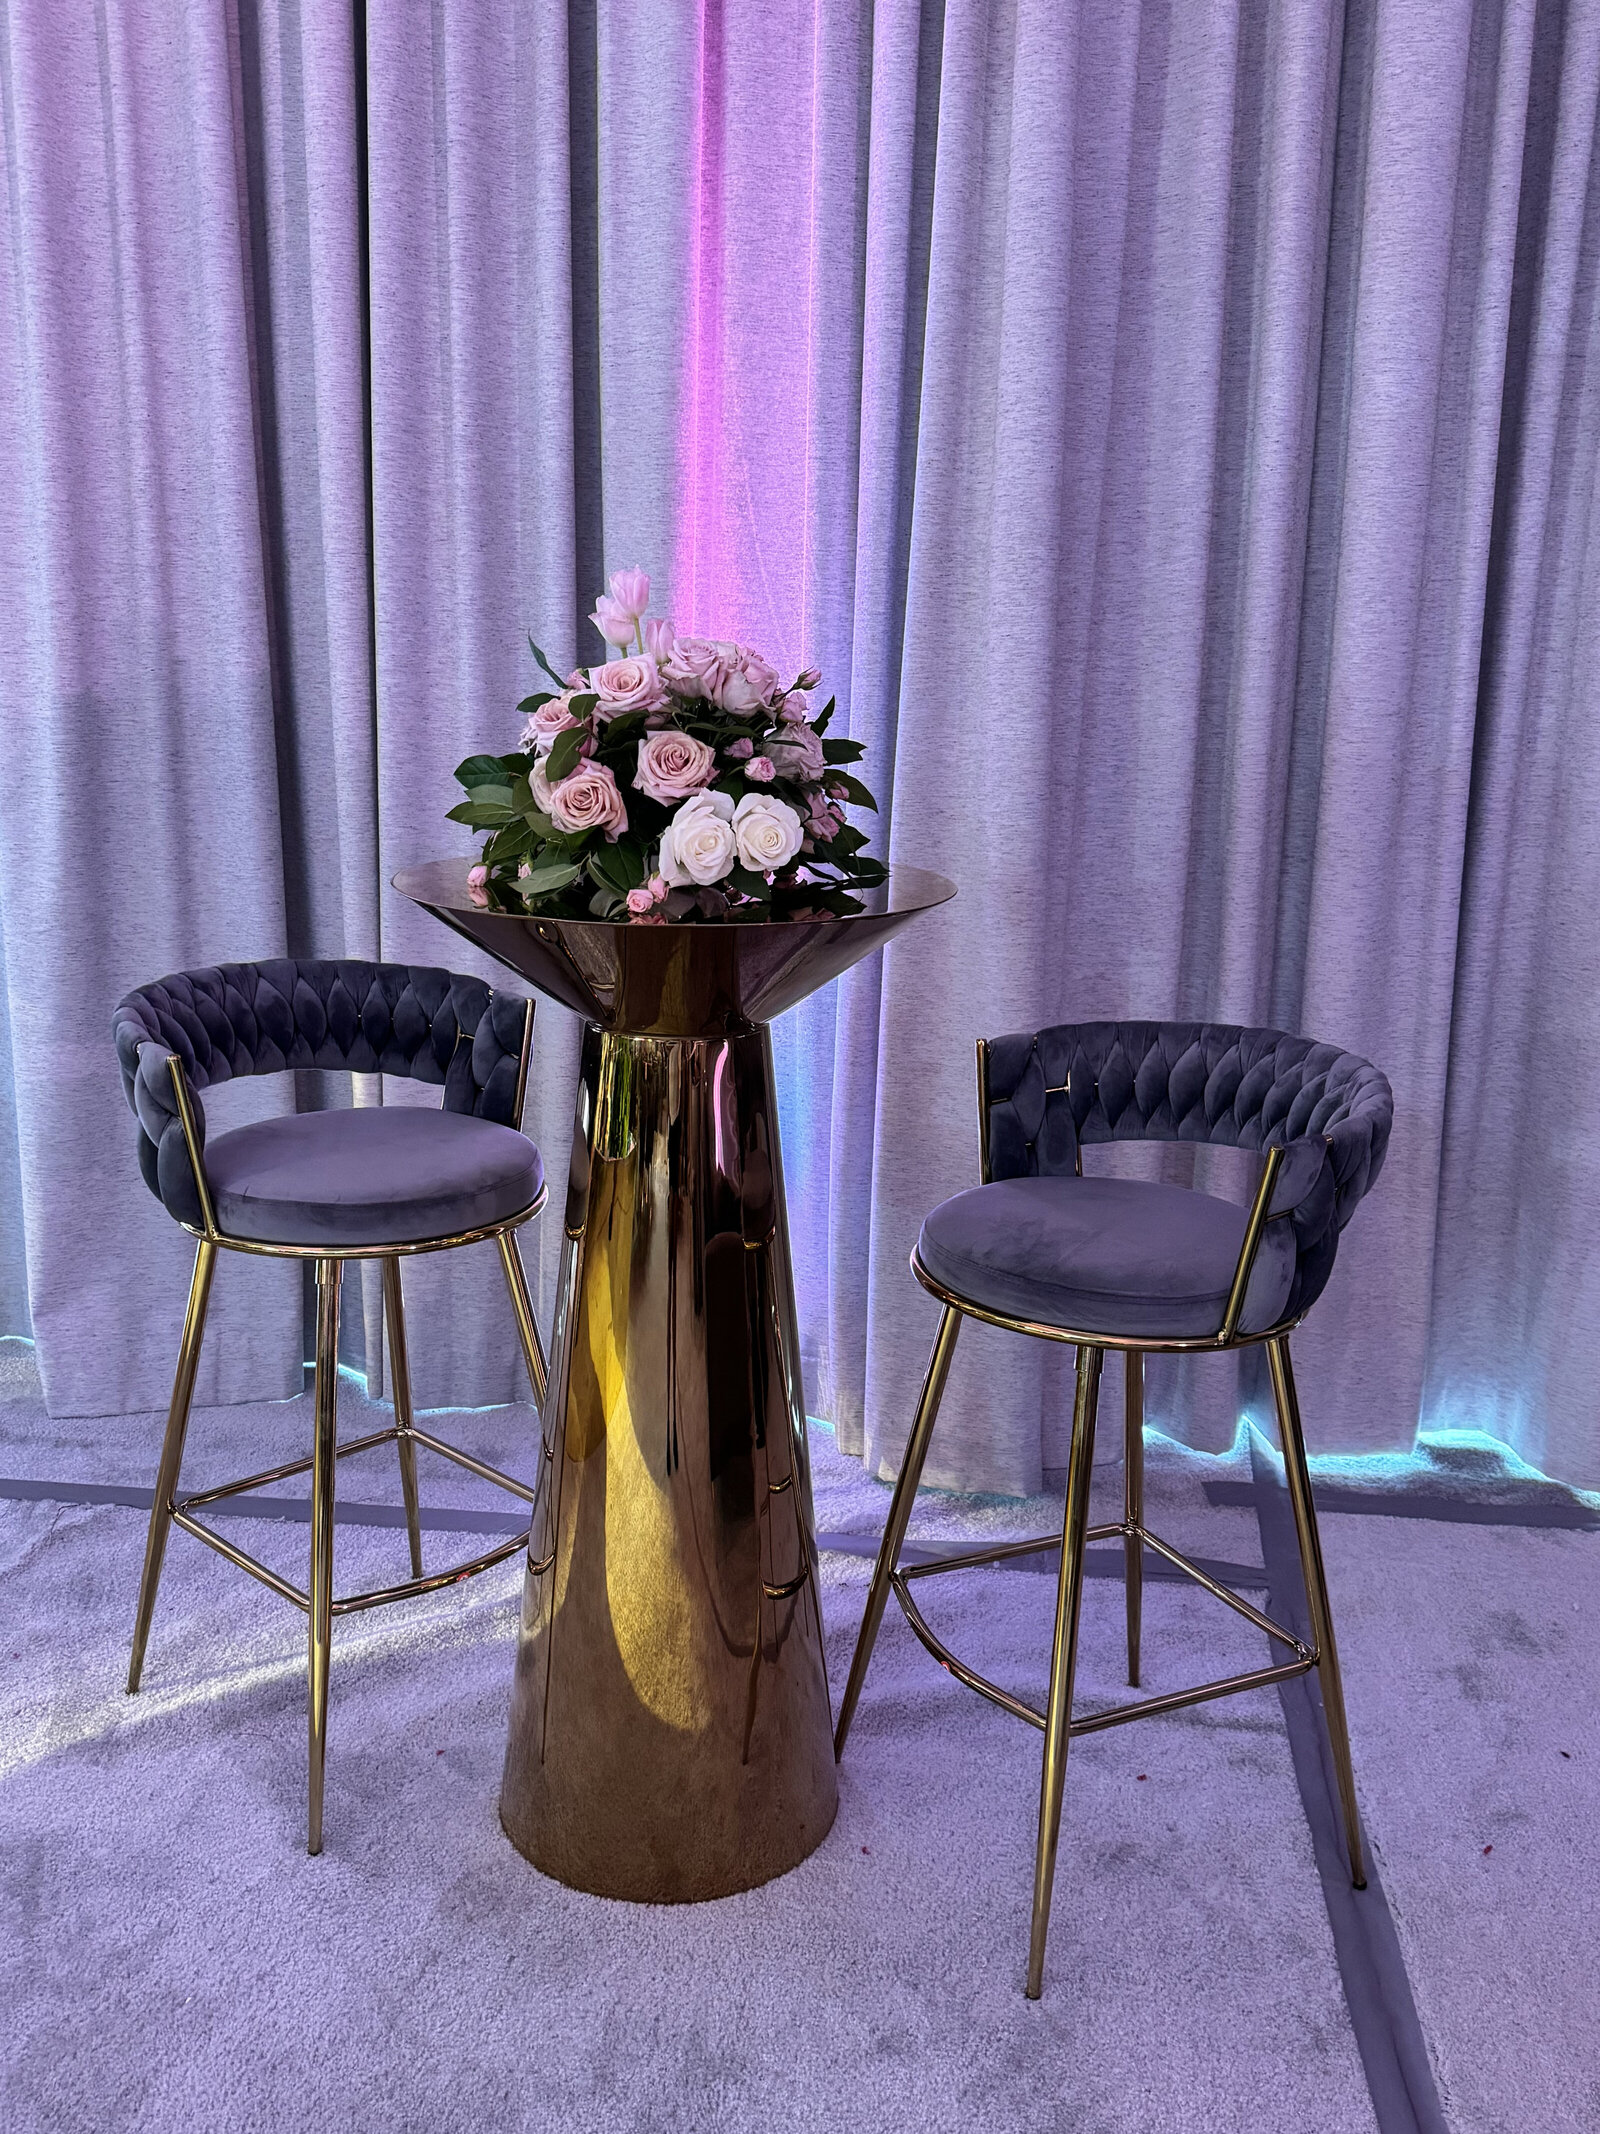 Event Decor from Essence of Flair